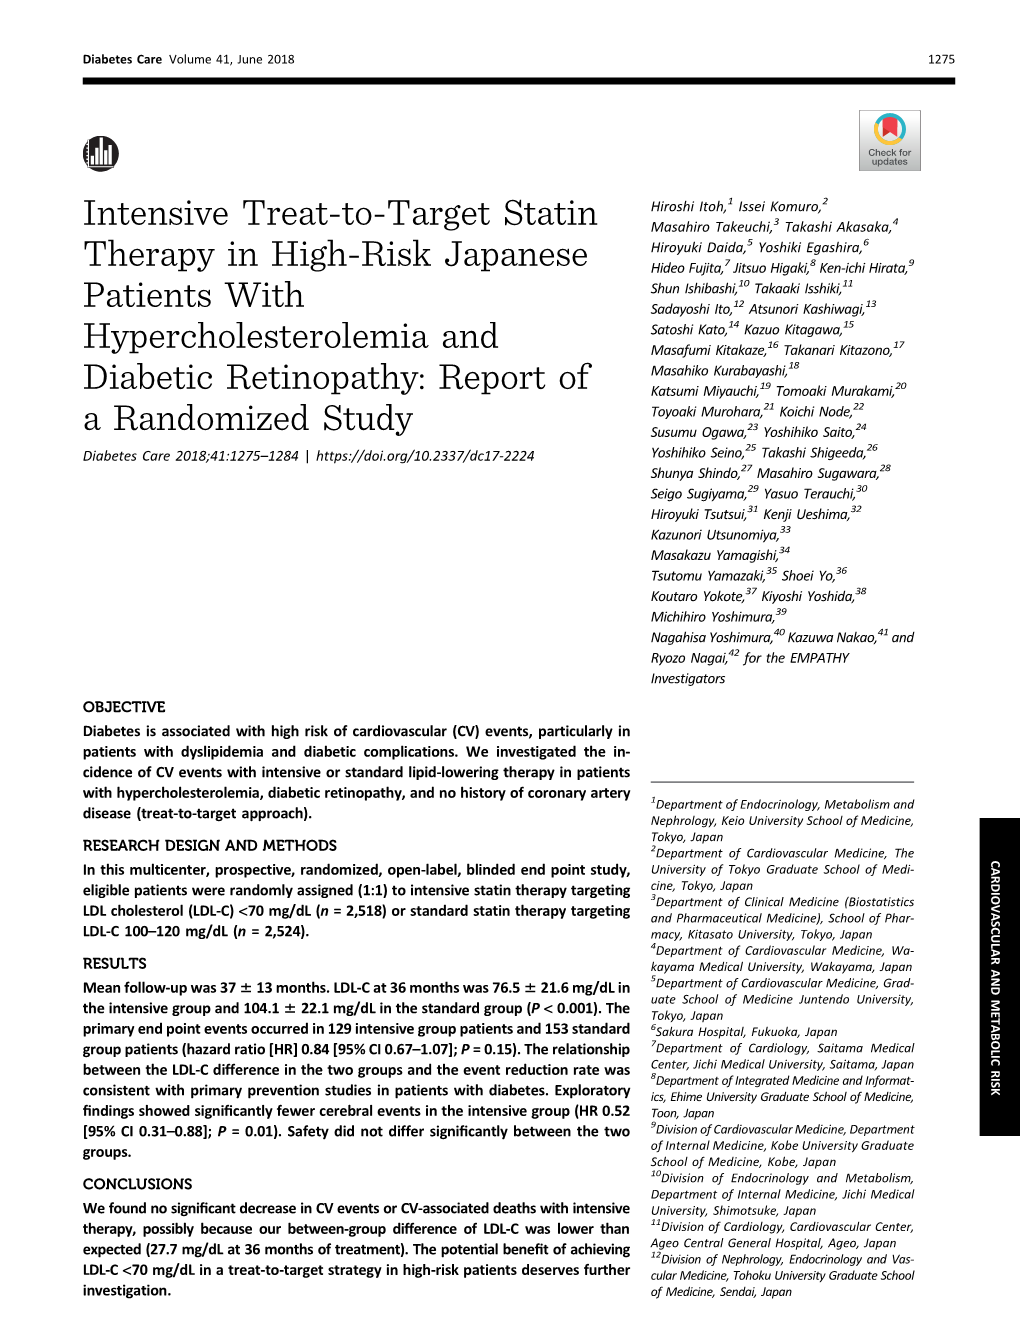 Intensive Treat-To-Target Statin Therapy in High